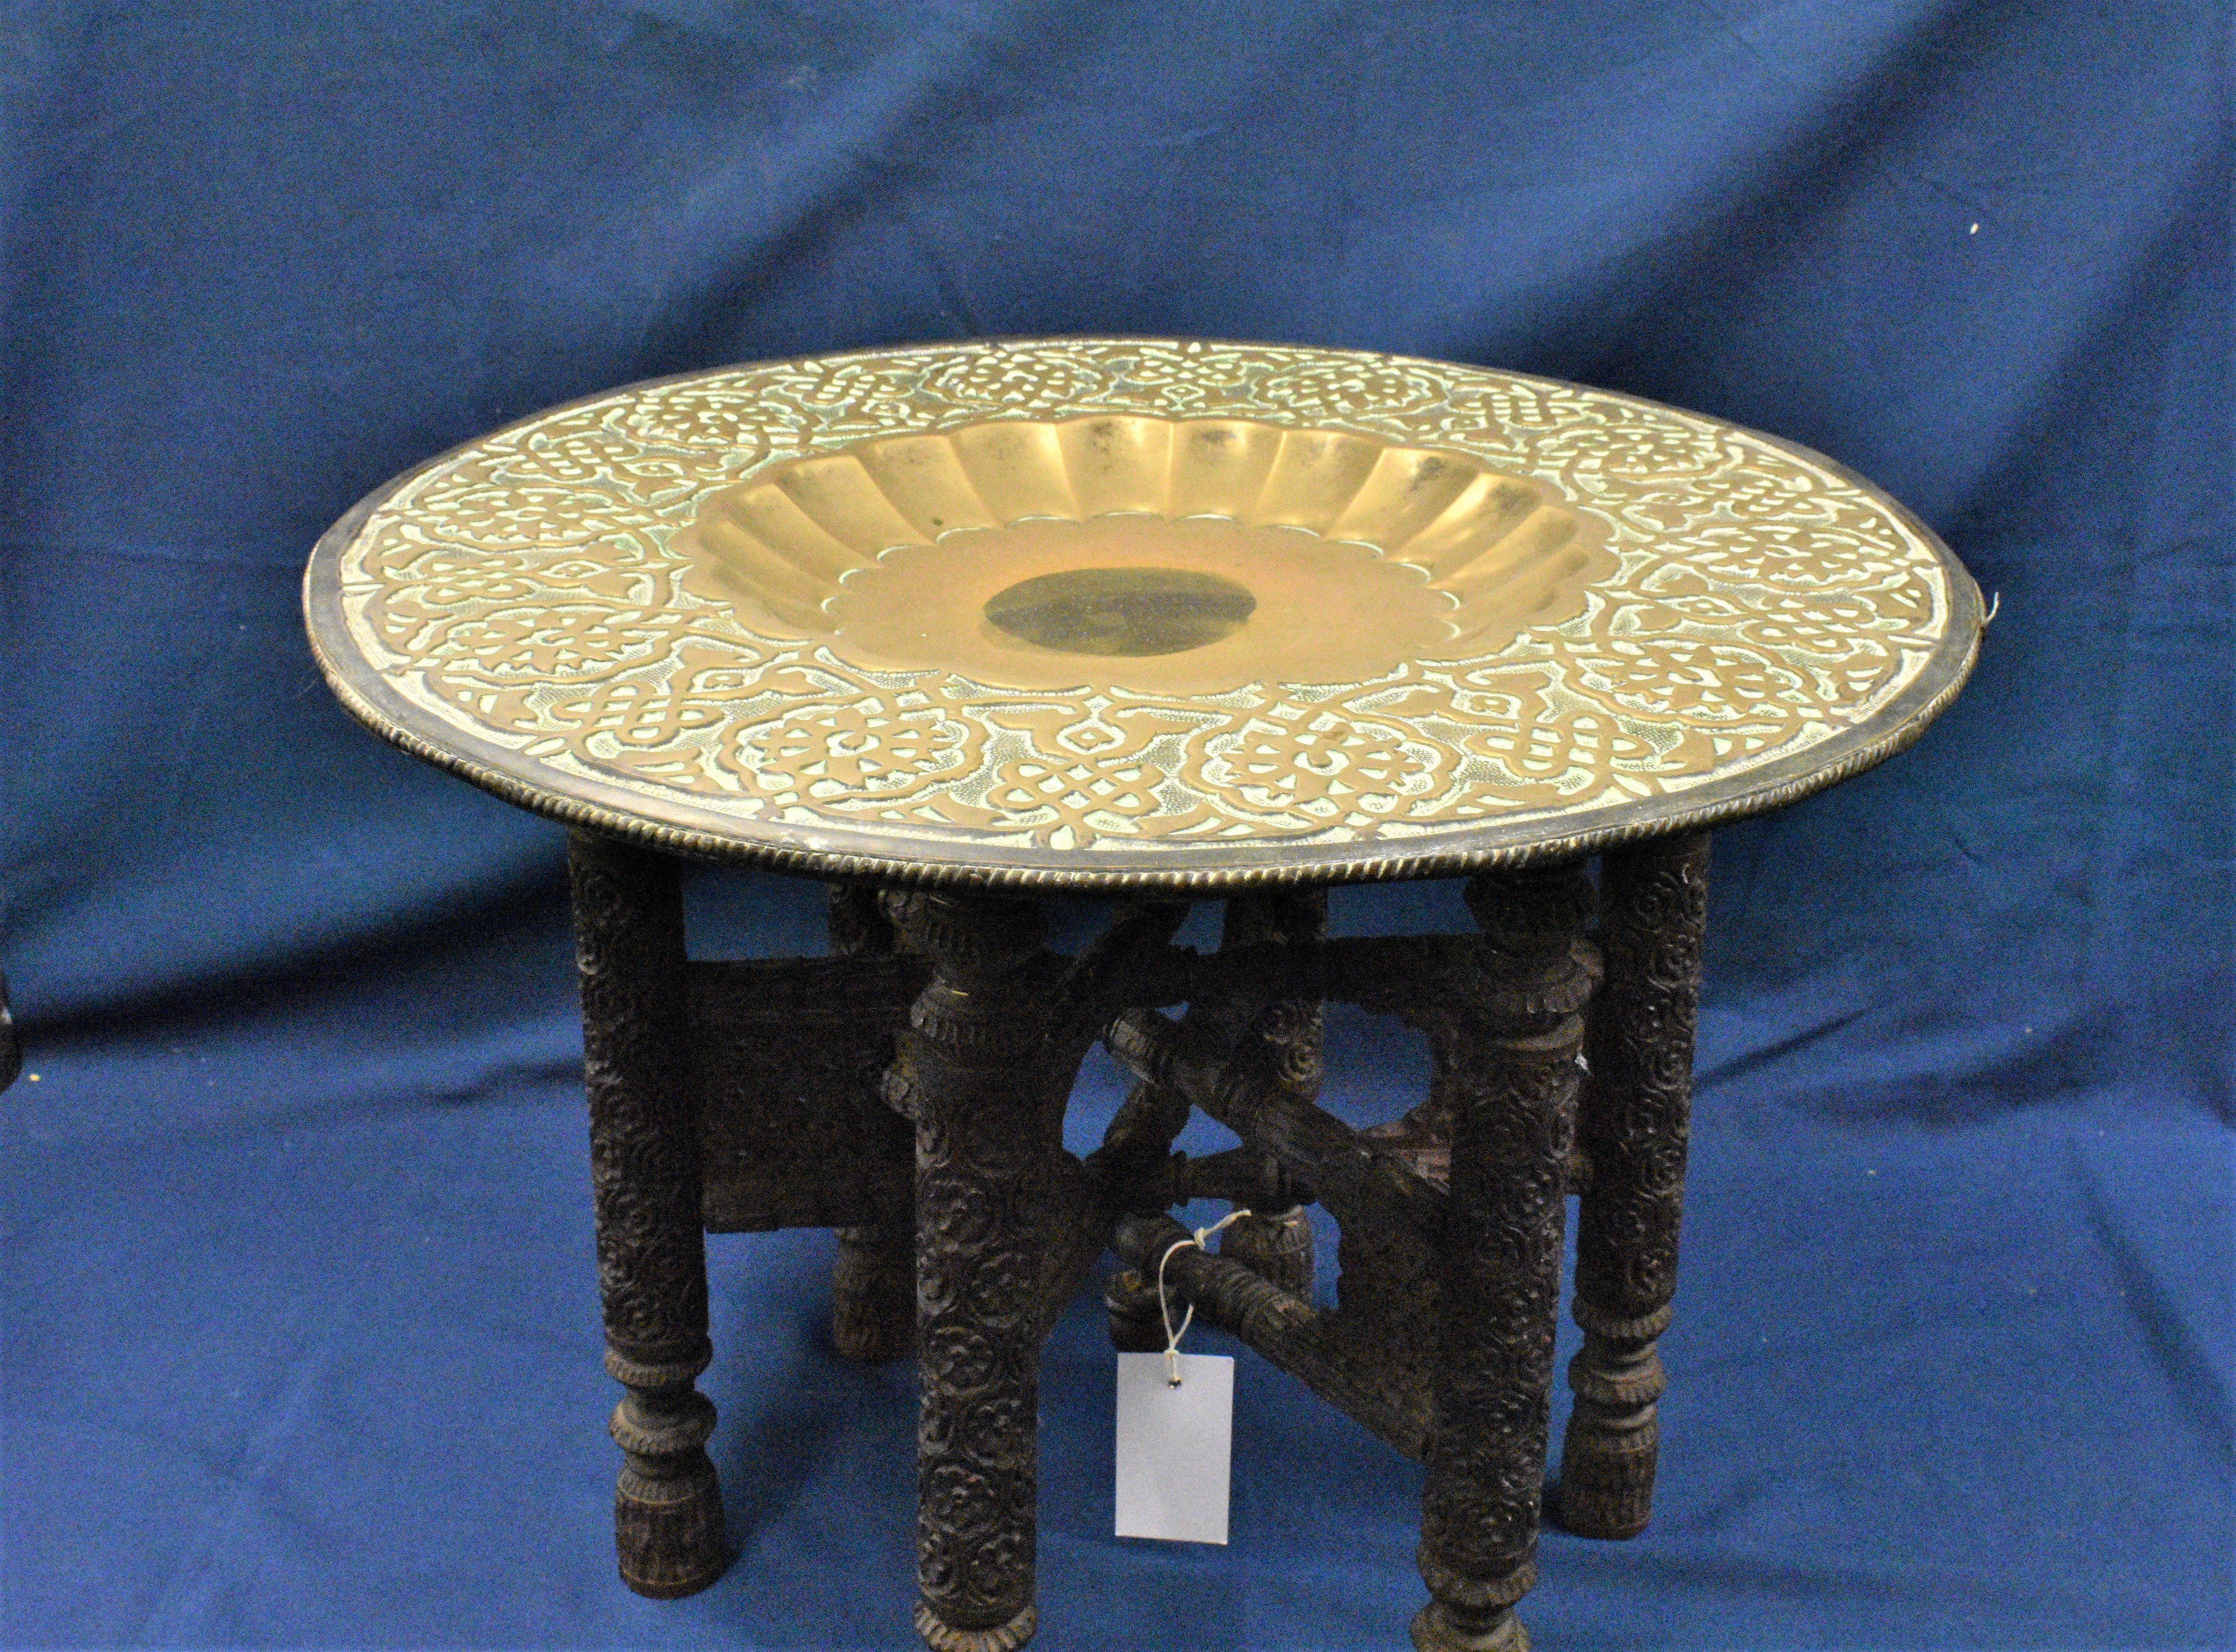 An antique Eastern brass tiffin table with dished top with calligraphy around the border, on a